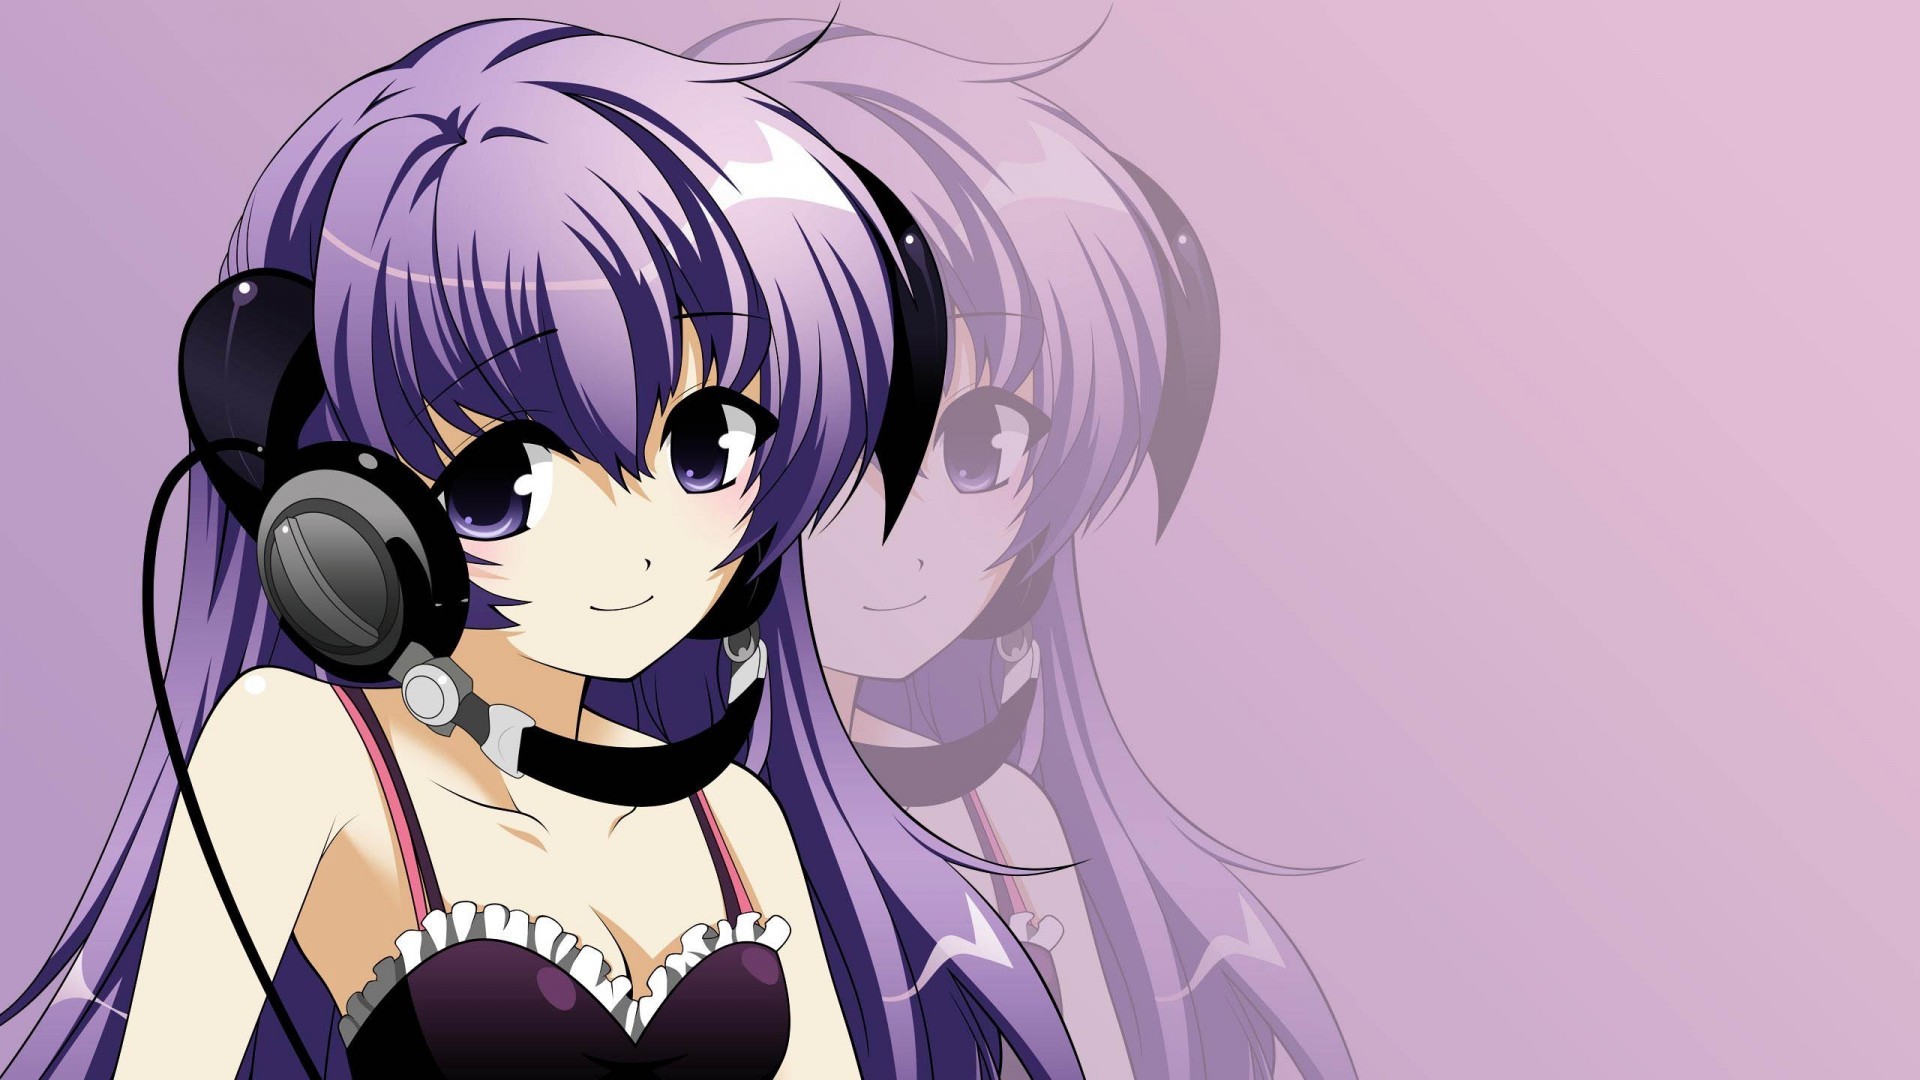 1920x1080 Cute Girl Anime Images - Wallpapers PC Free Download